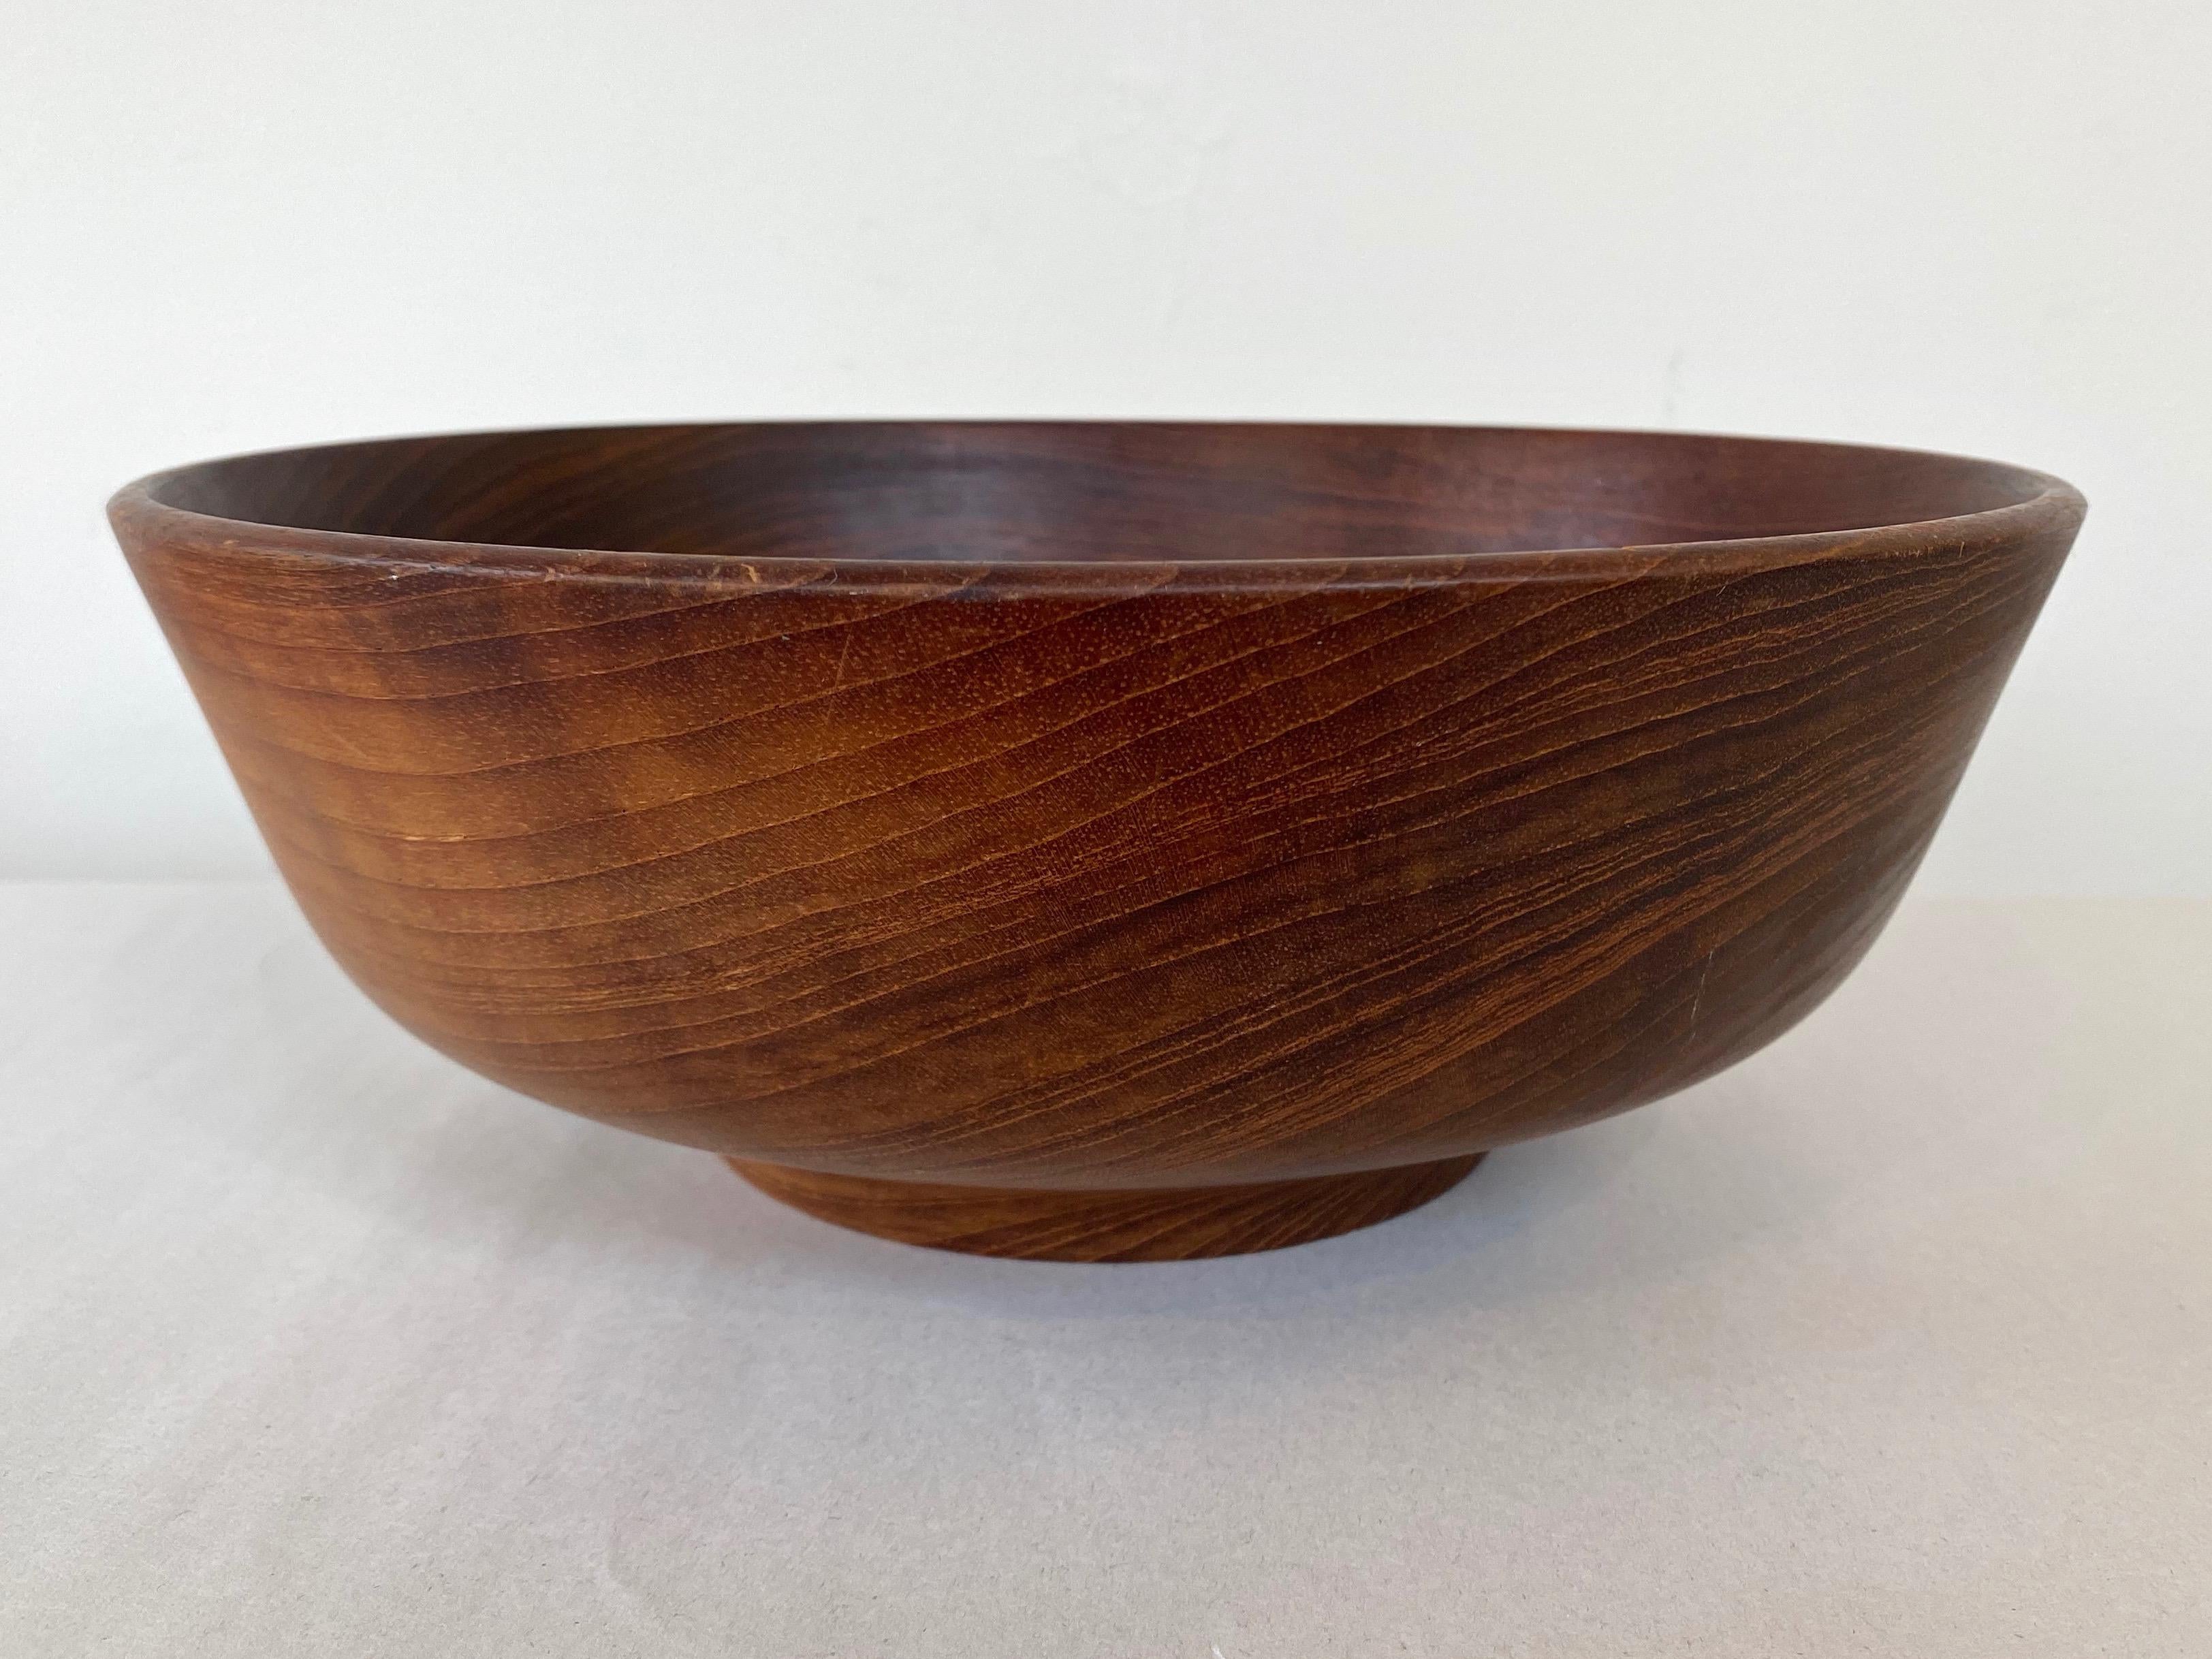 Bob Stocksdale Teak Turned Wood Bowl with Exceptional Grain Pattern, Early 1970s In Good Condition For Sale In San Francisco, CA